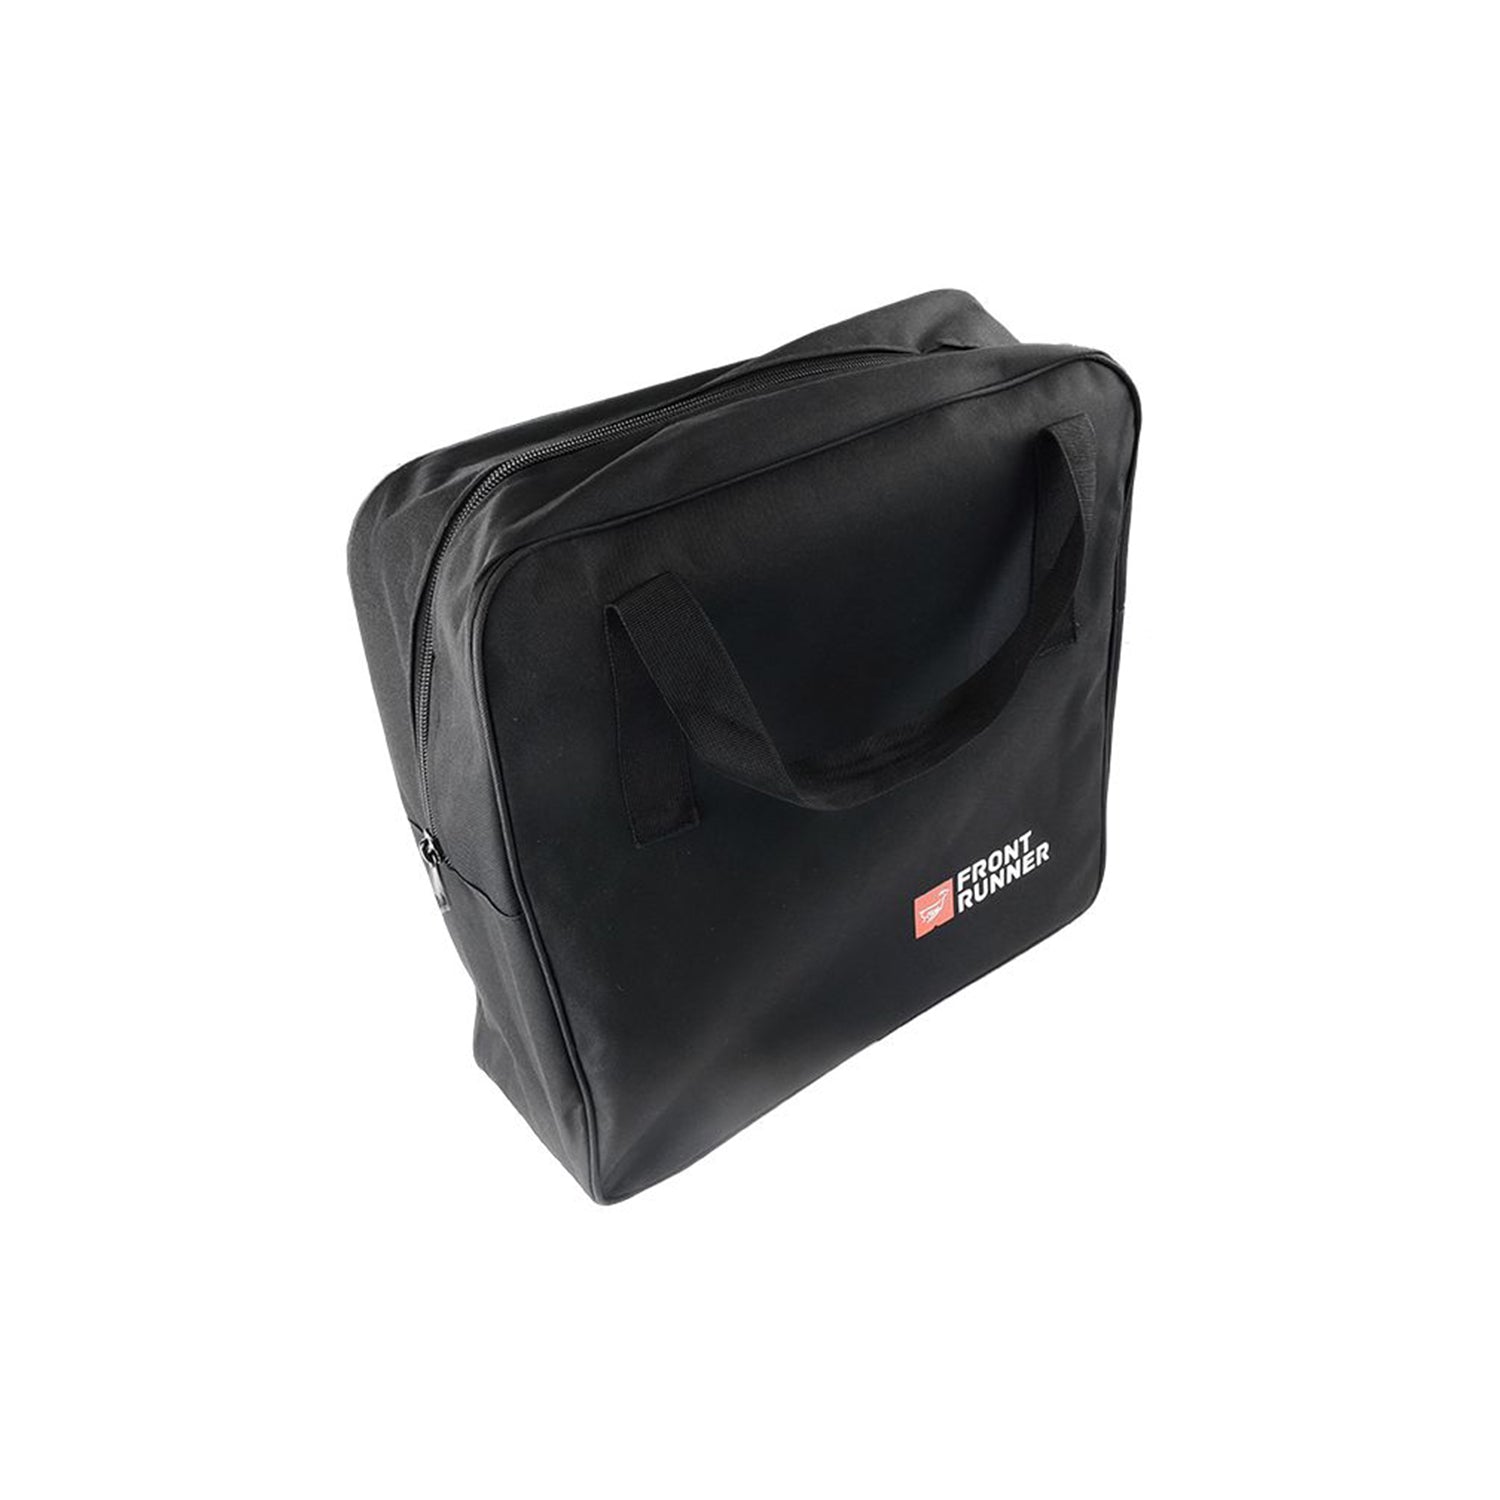 [EXPANDER CHAIR DOUBLE STORAGE BAG]